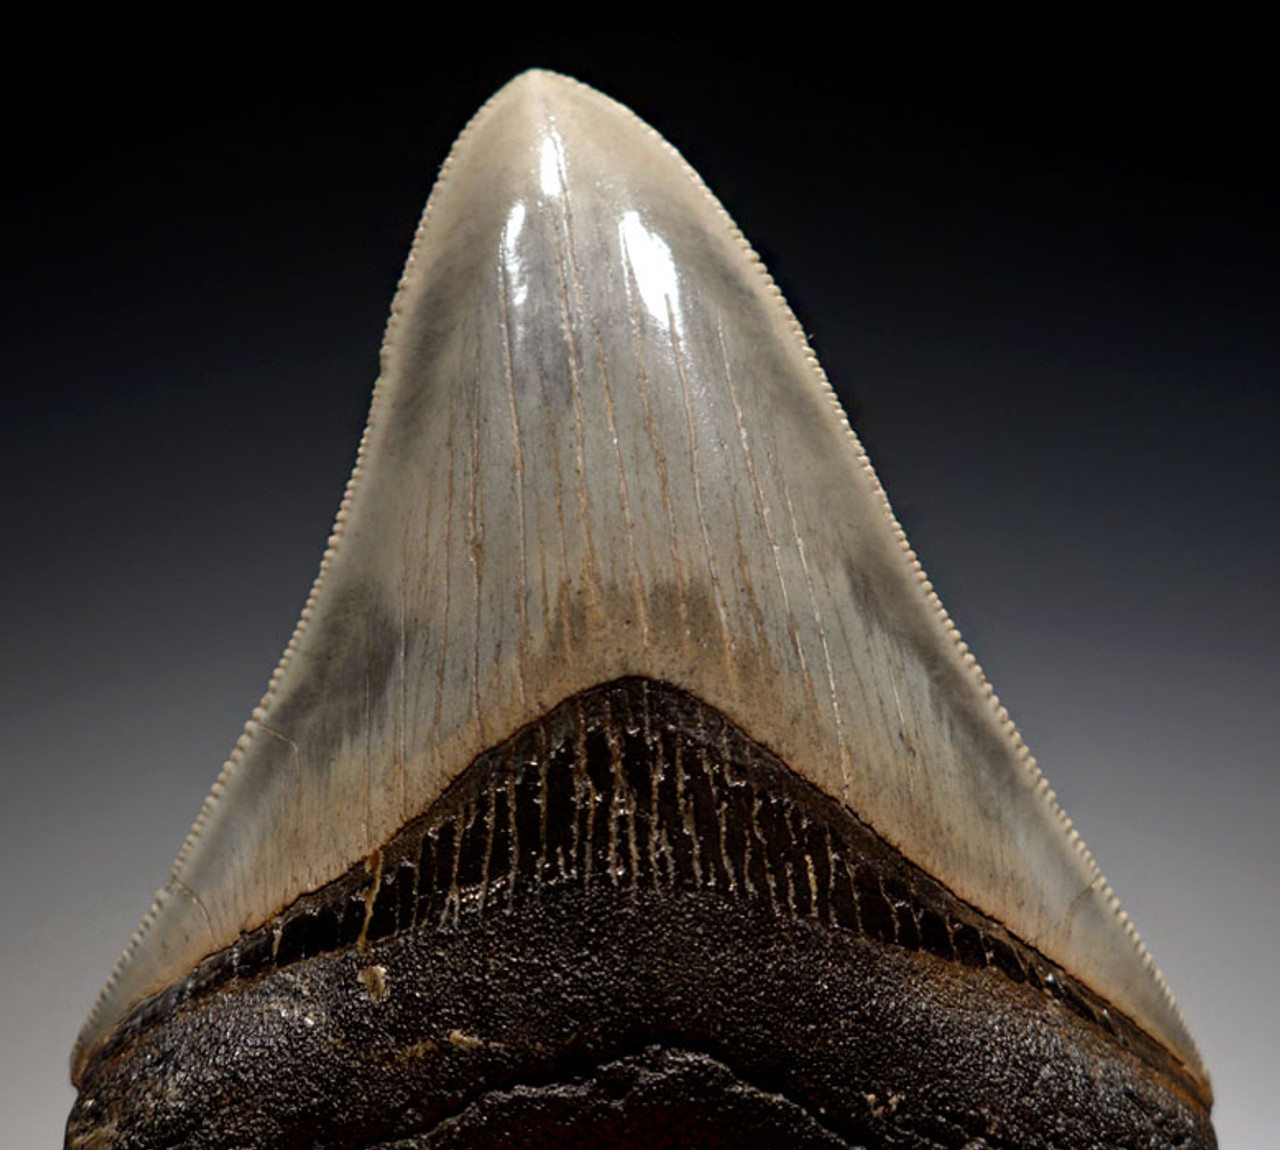 SH6-332 - FINEST GRADE 3.6 INCH MEGALODON SHARK TOOTH WITH THUNDER CLOUDS ENAMEL PATTERNS